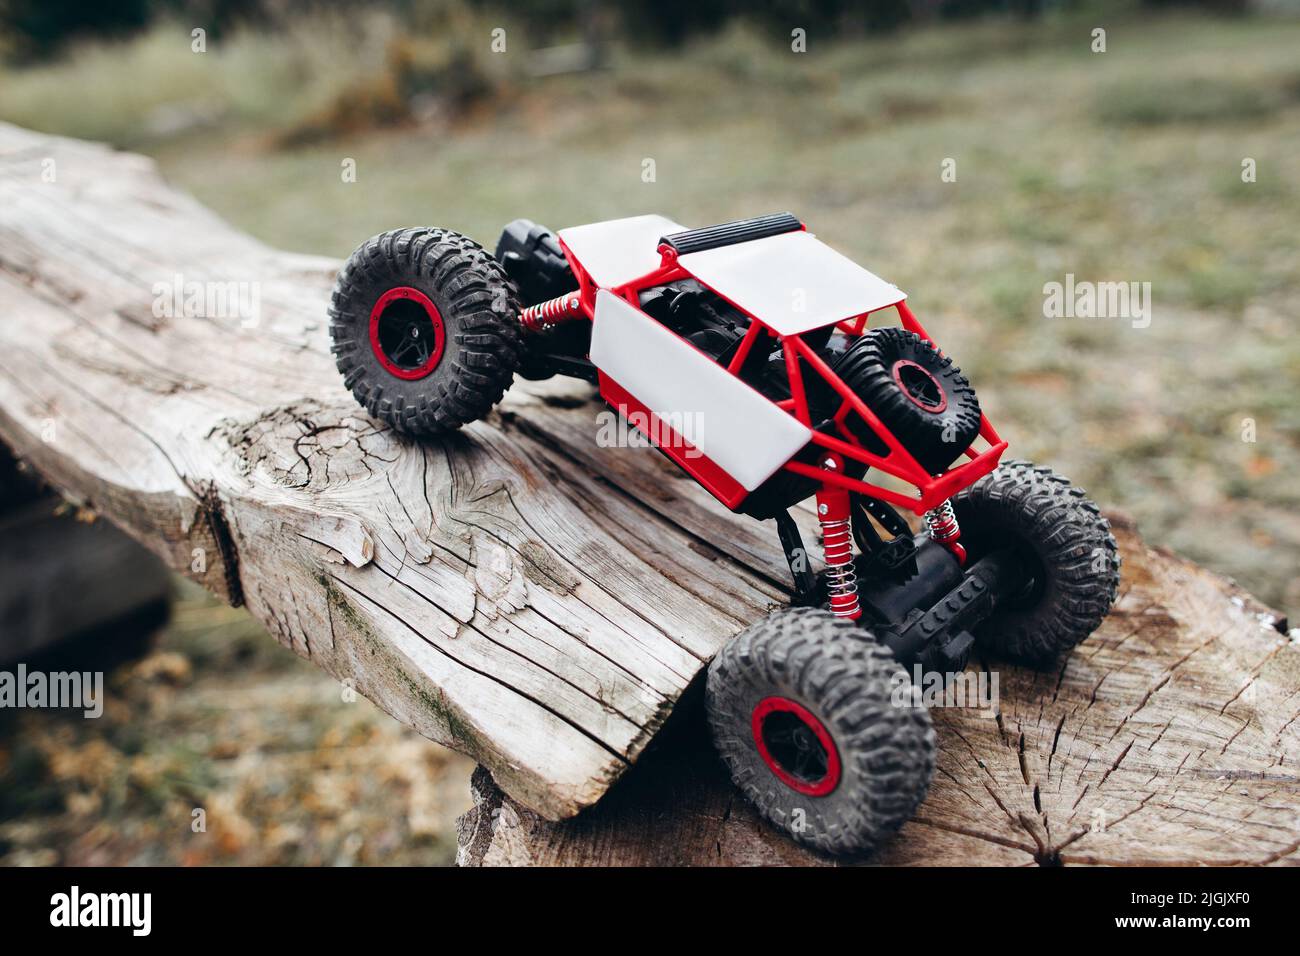 Rc car overcoming wooden log, free space Stock Photo